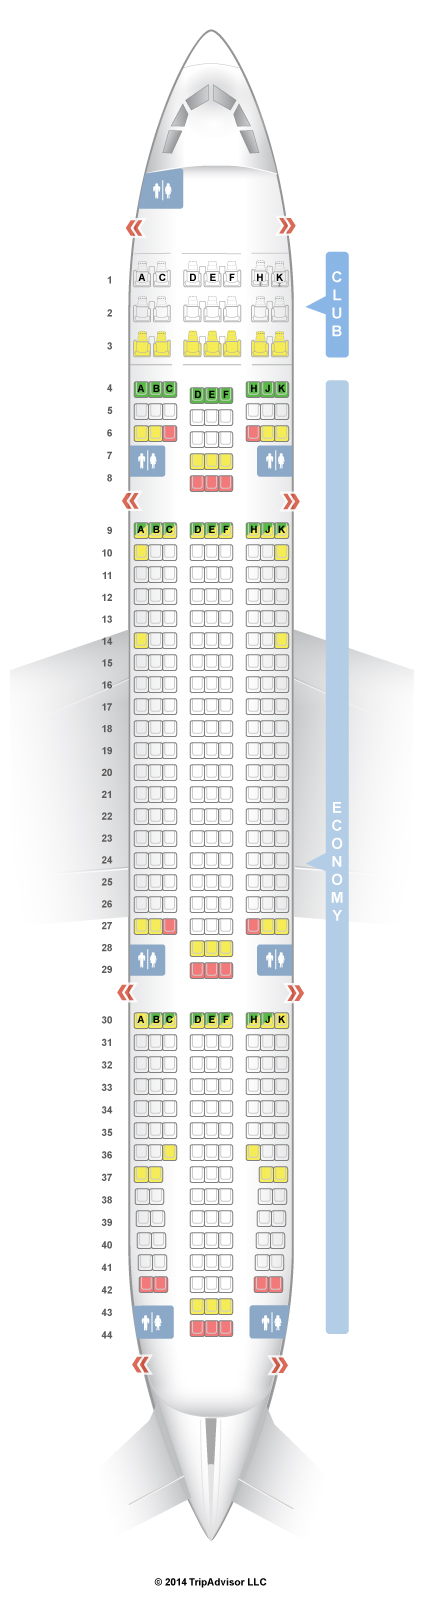 Seat Map And Seating Chart Airbus A Air Transat Seats Porn Sexiz Pix